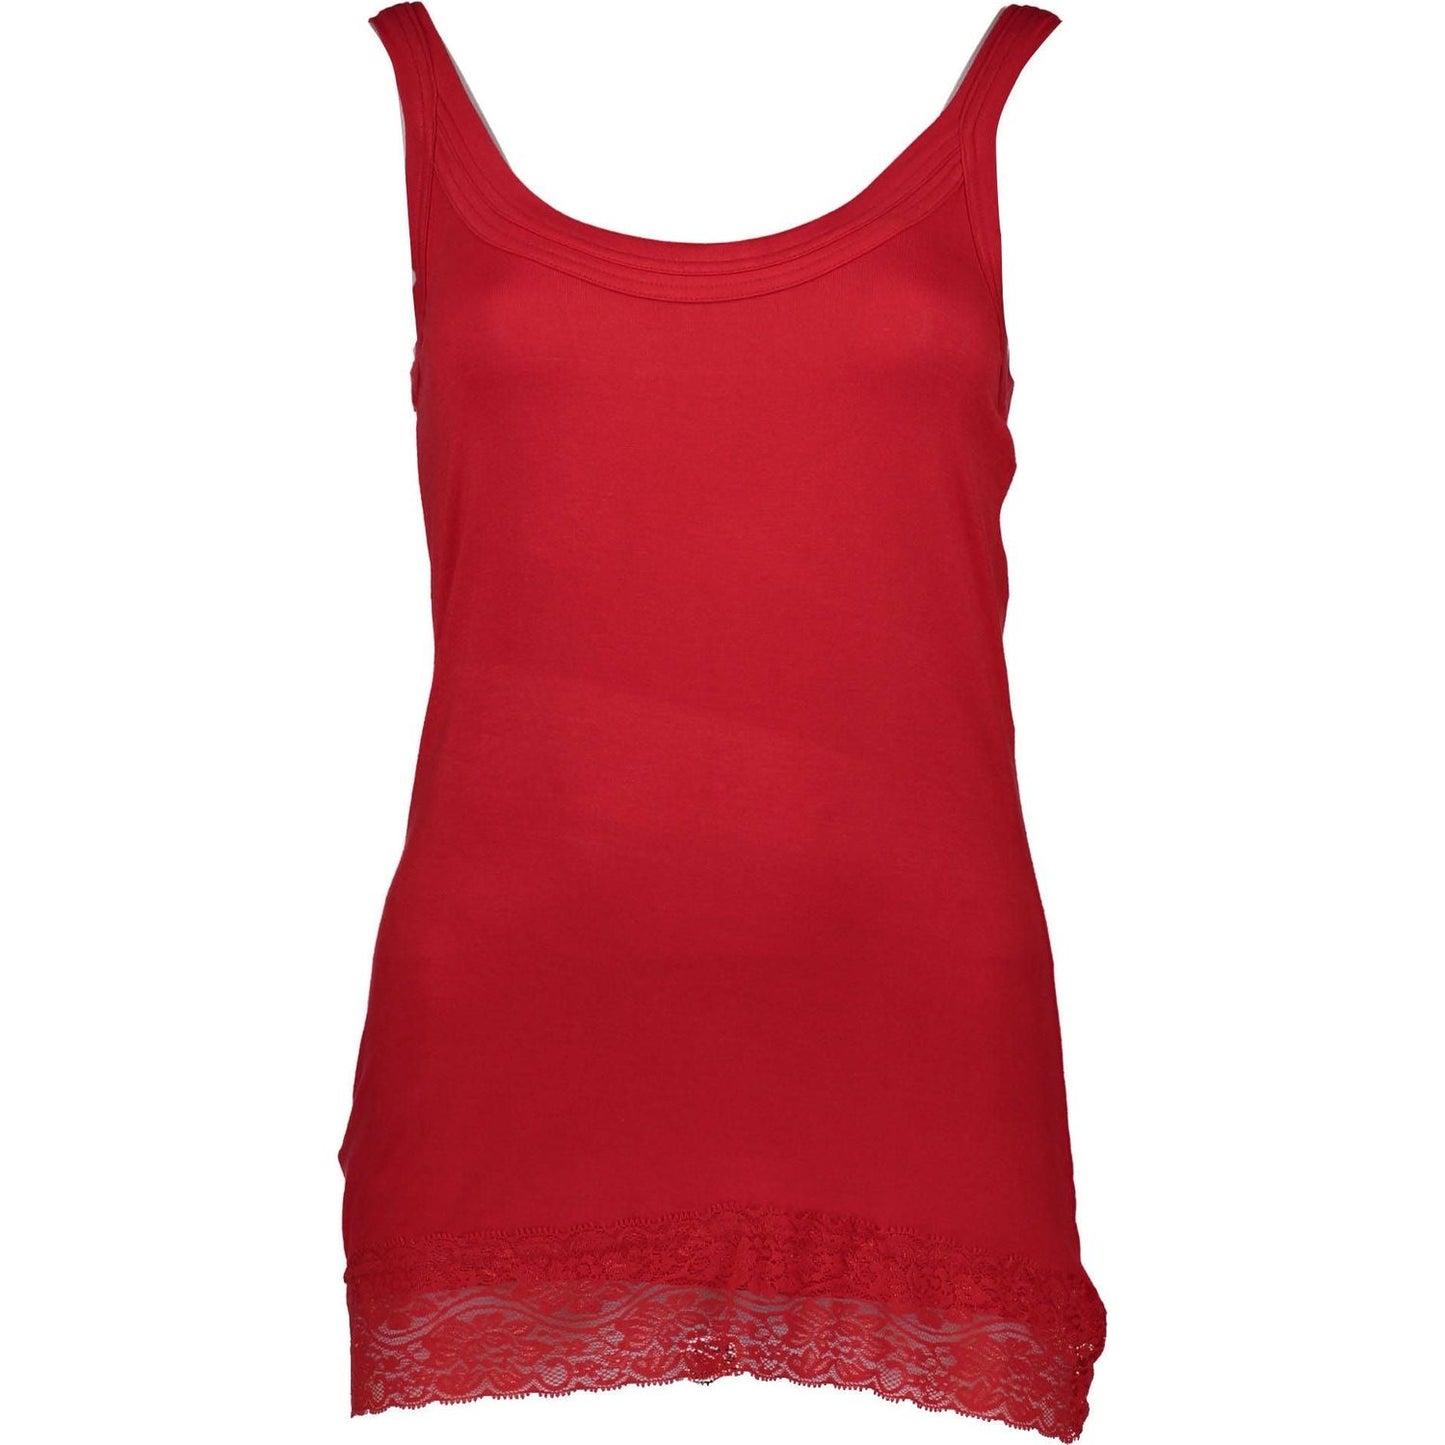 Silvian Heach Chic Red Lace Insert Tank Top chic-red-lace-insert-tank-top